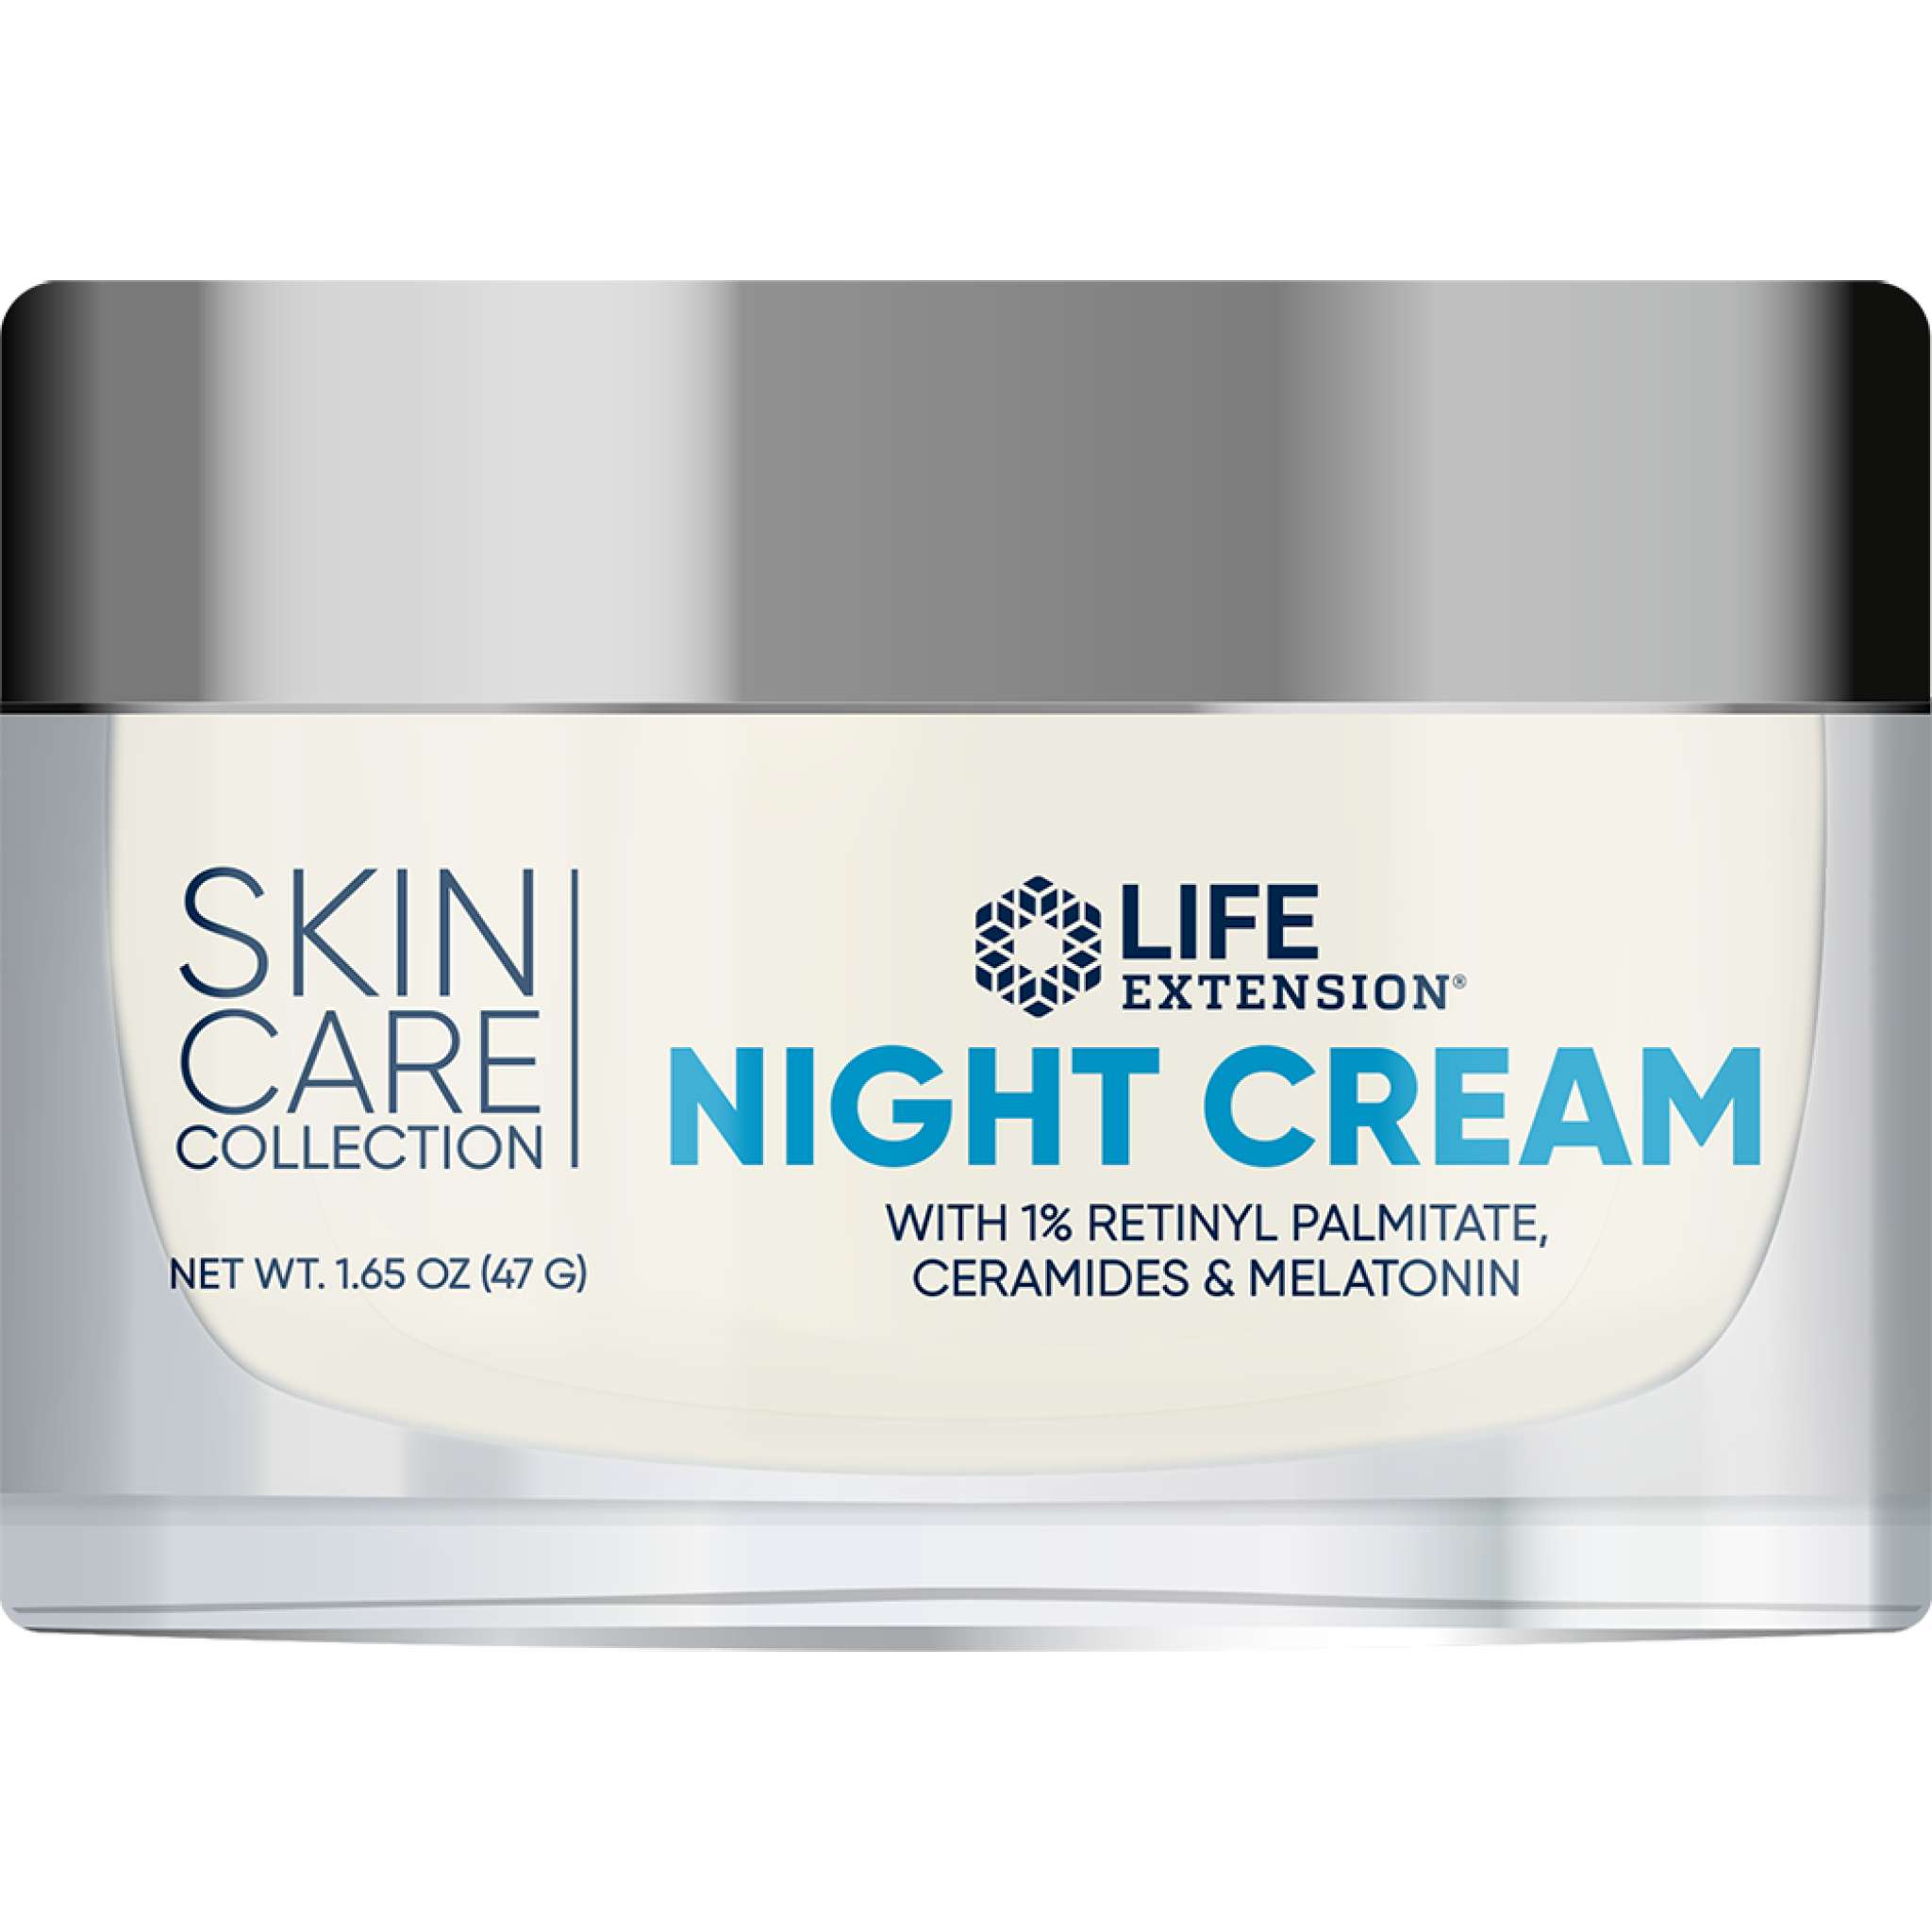 Life Extension - Night crm Skin Care